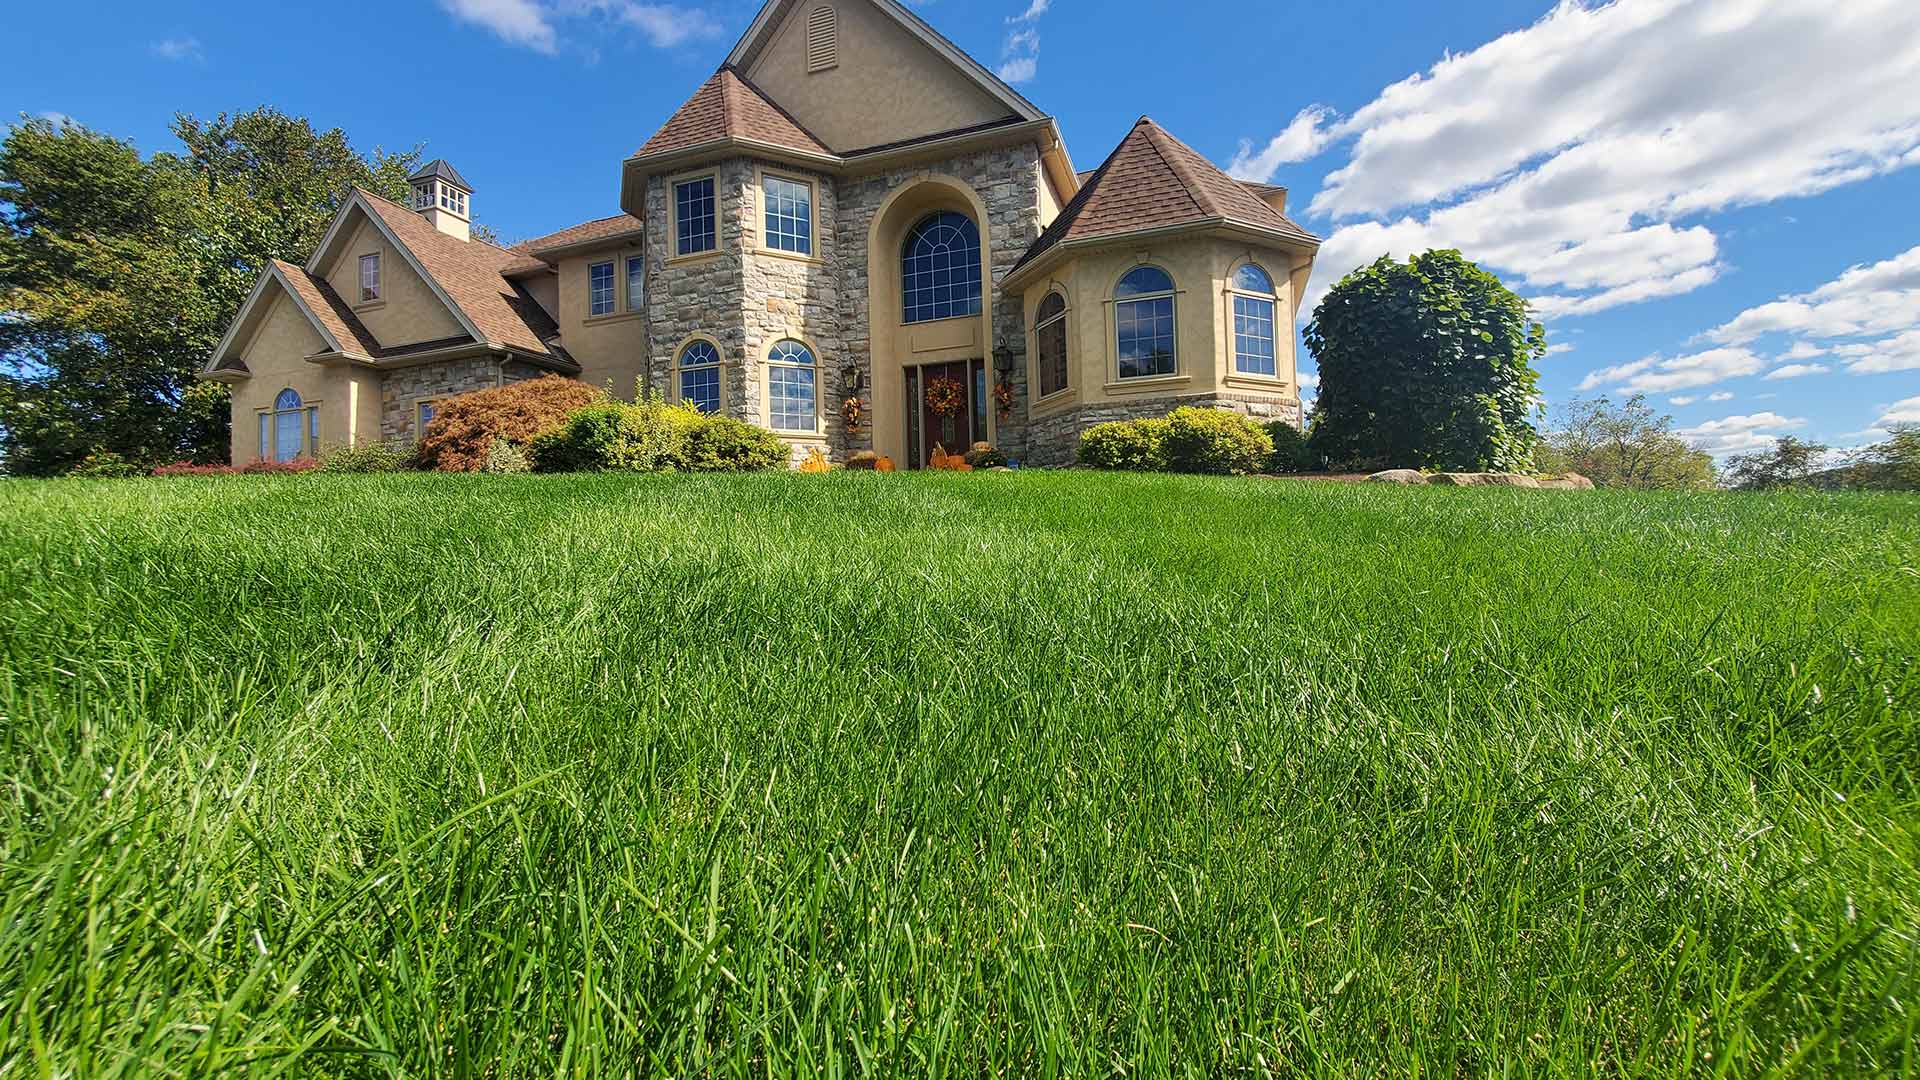 Home front with healthy lawn and landscape near Emmaus, PA.